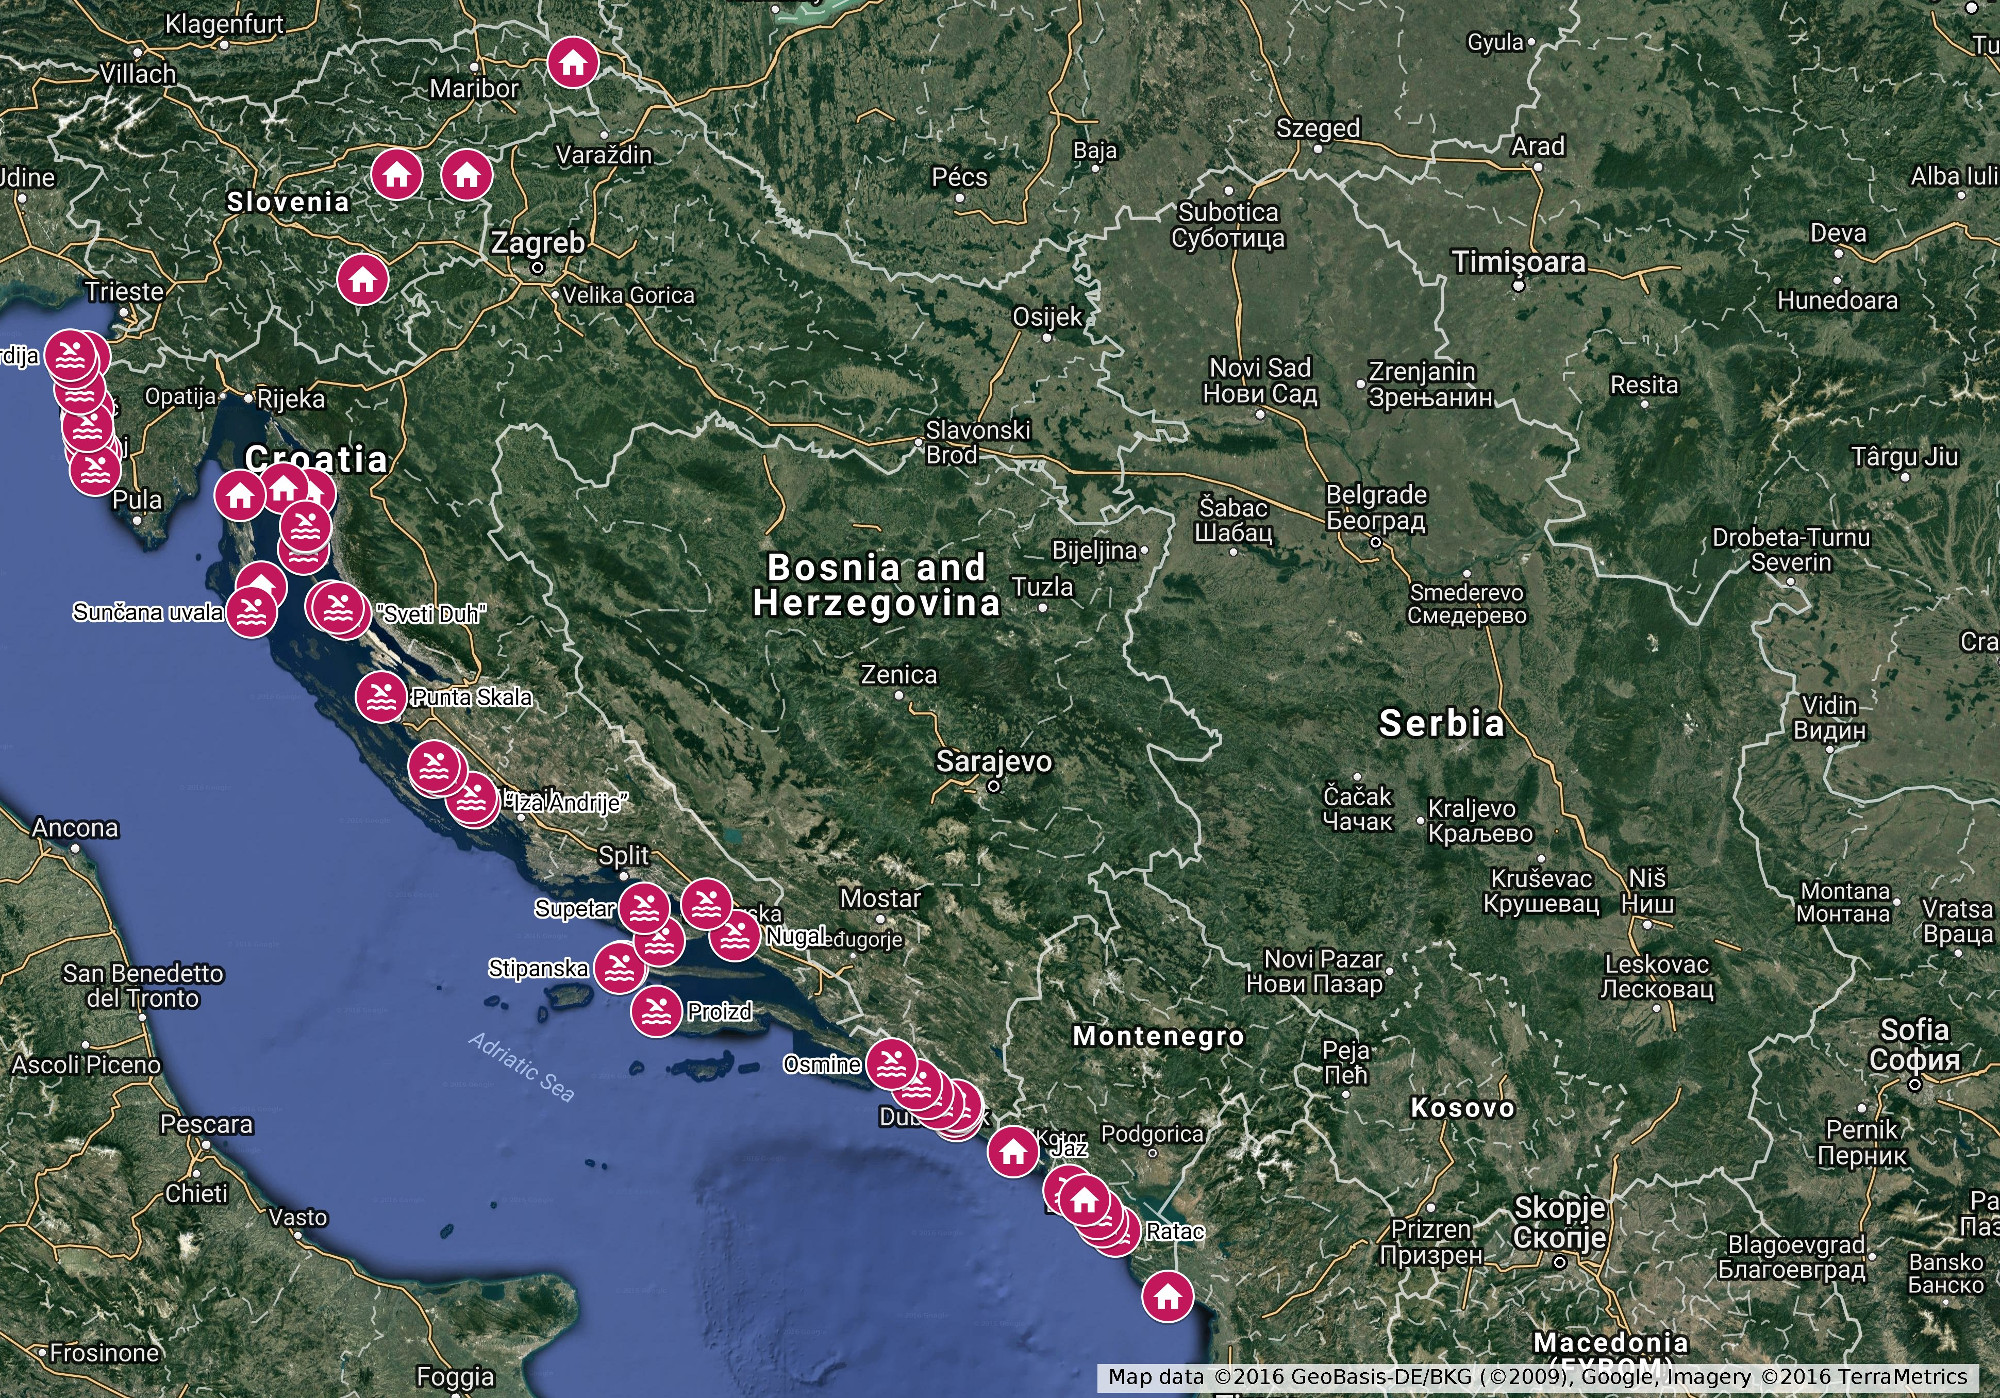 INTERACTIVE MAP Nudist beaches and tourist centers on the Adriatic